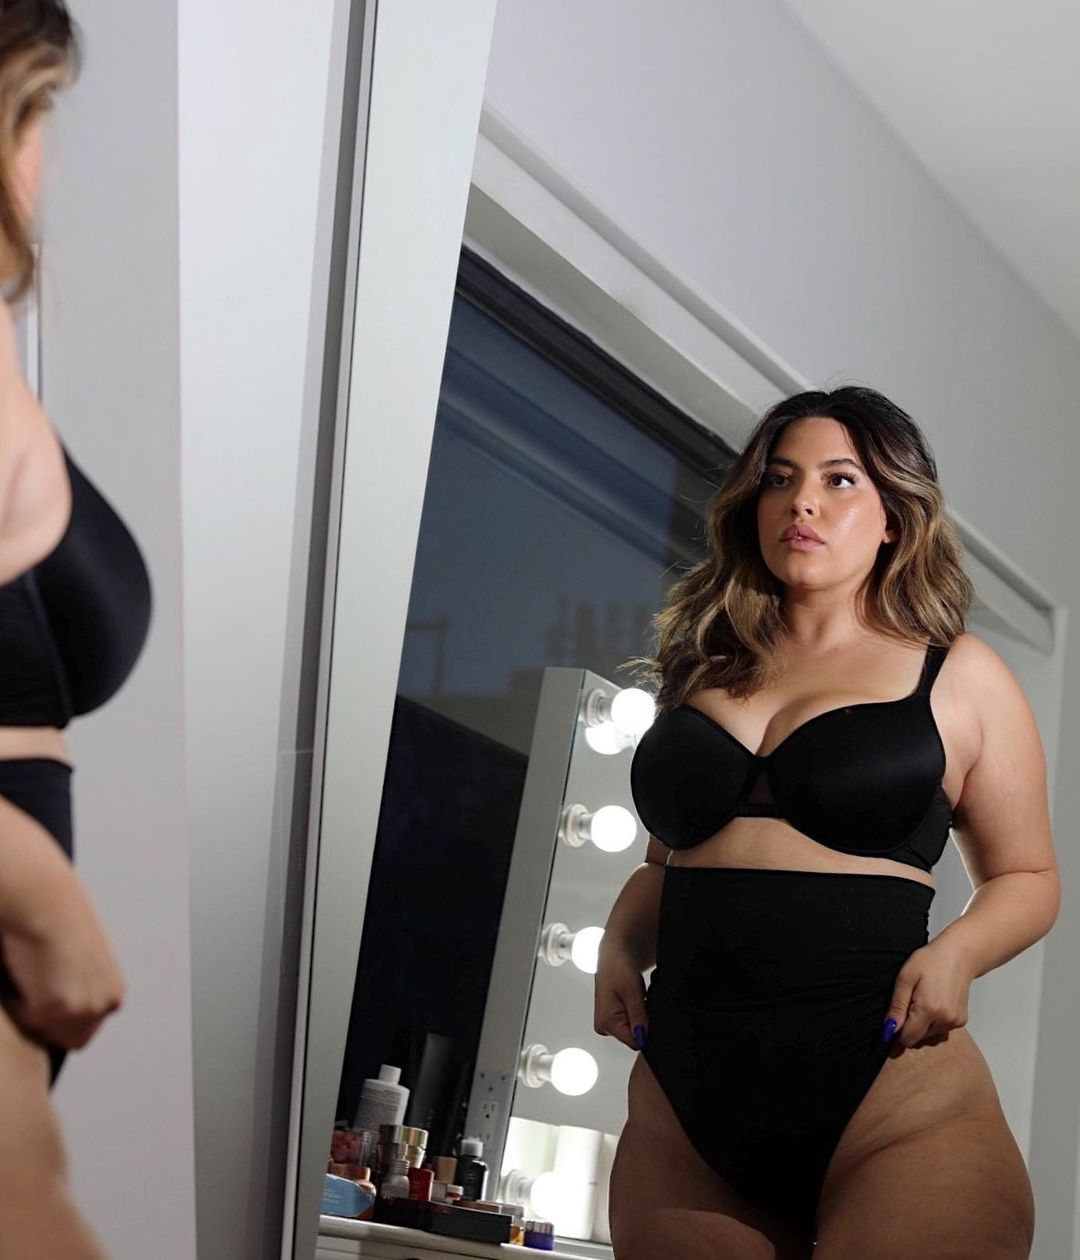 1 Pfund Kilo Dream Girls: A Gallery of the Most Alluring Plus-Size Models